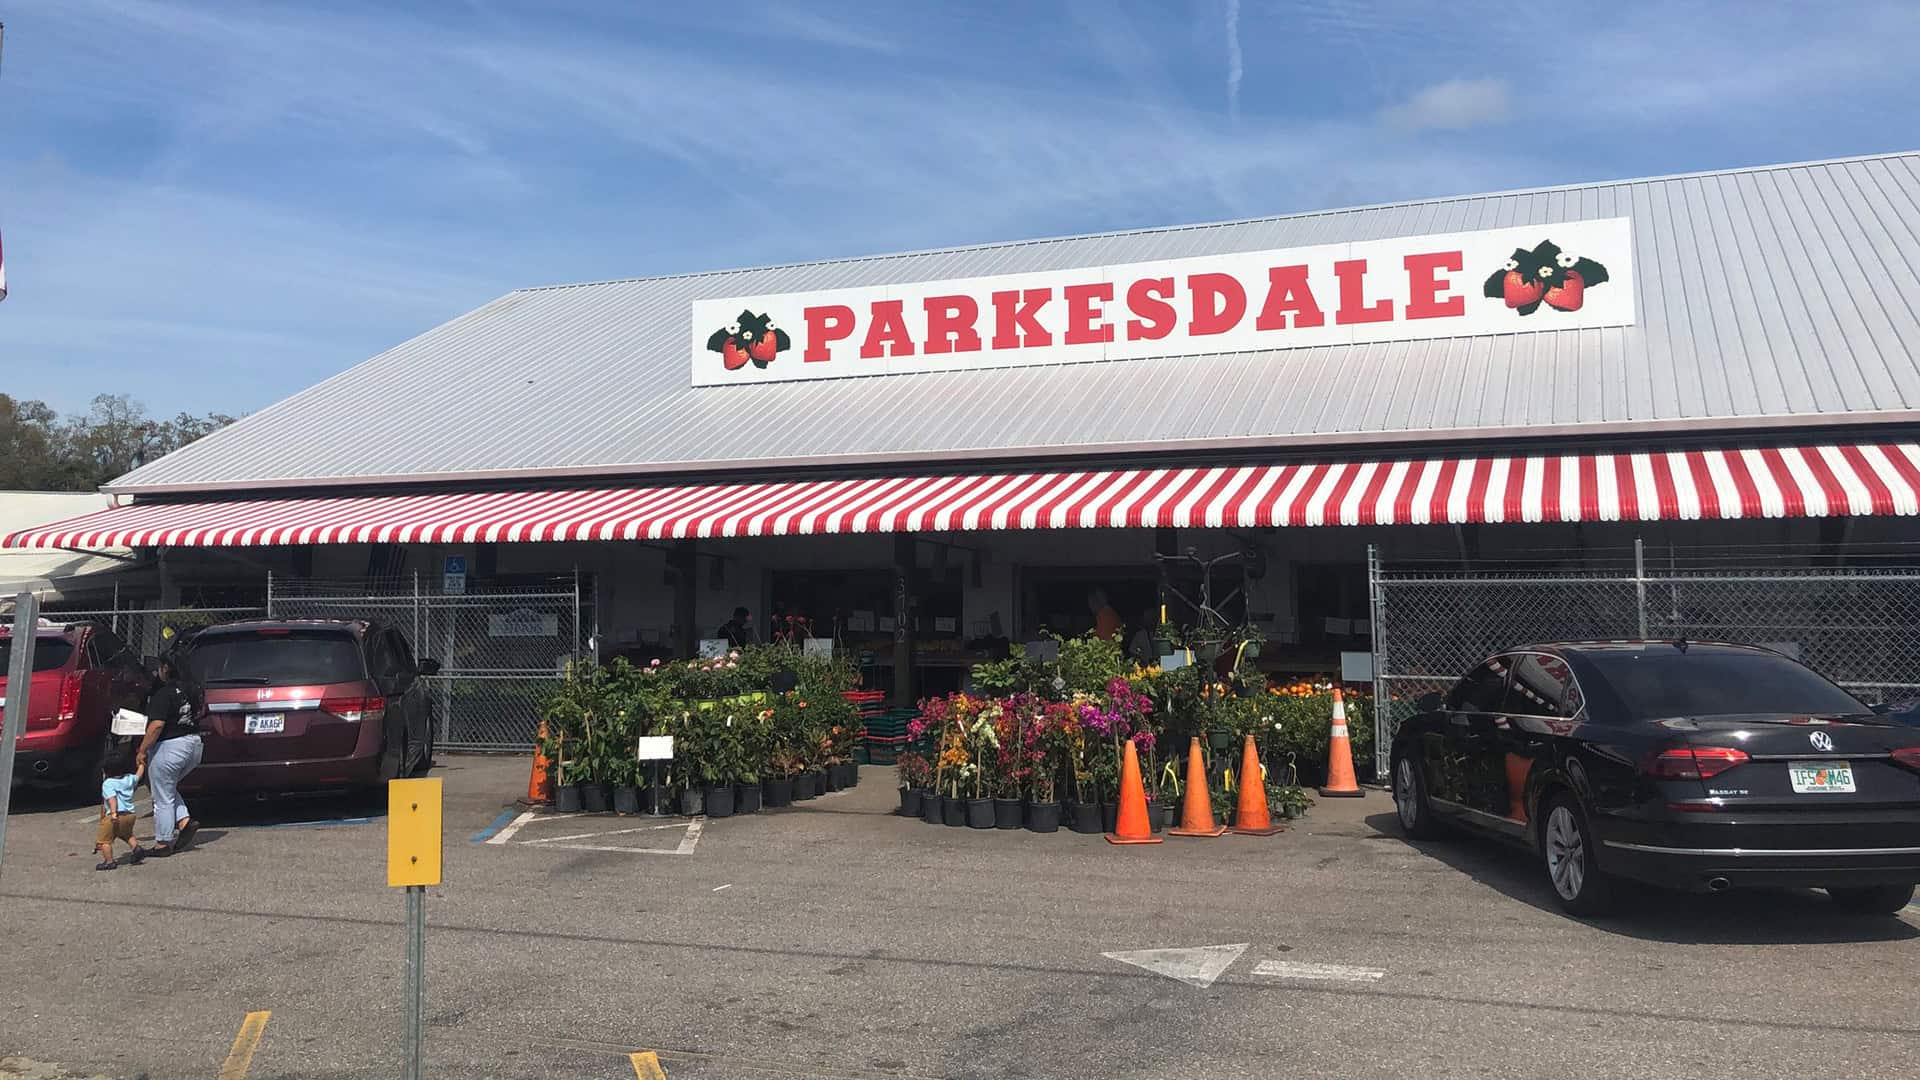 The famous Parkesdale Farm Market is hosting its first Garden Festival this July